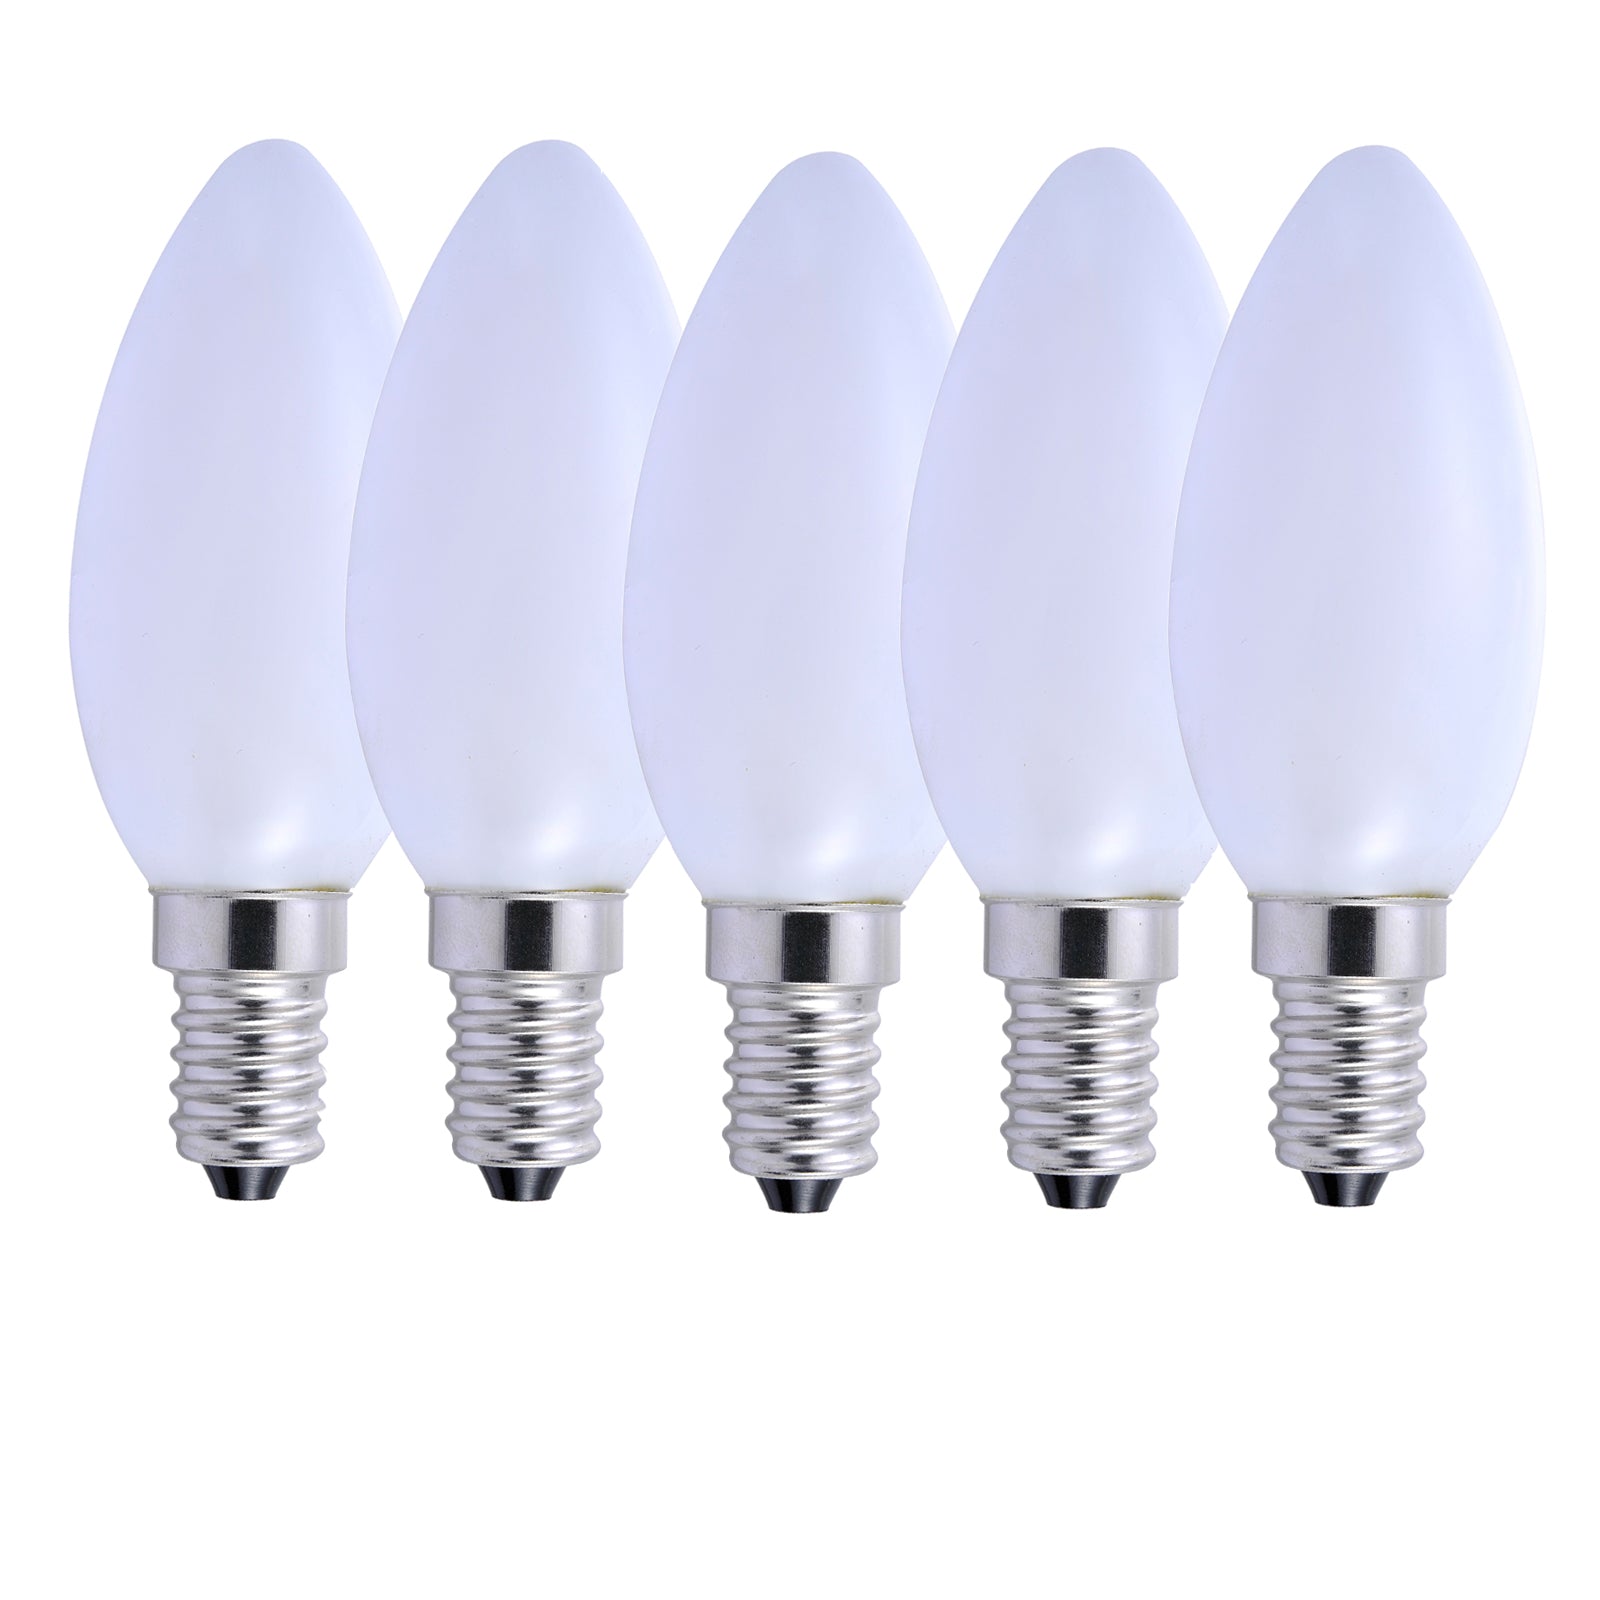 Harper Living Opal Glass Warm White 5W Dimmable LED E14 Candle Bulb, Pack of 5